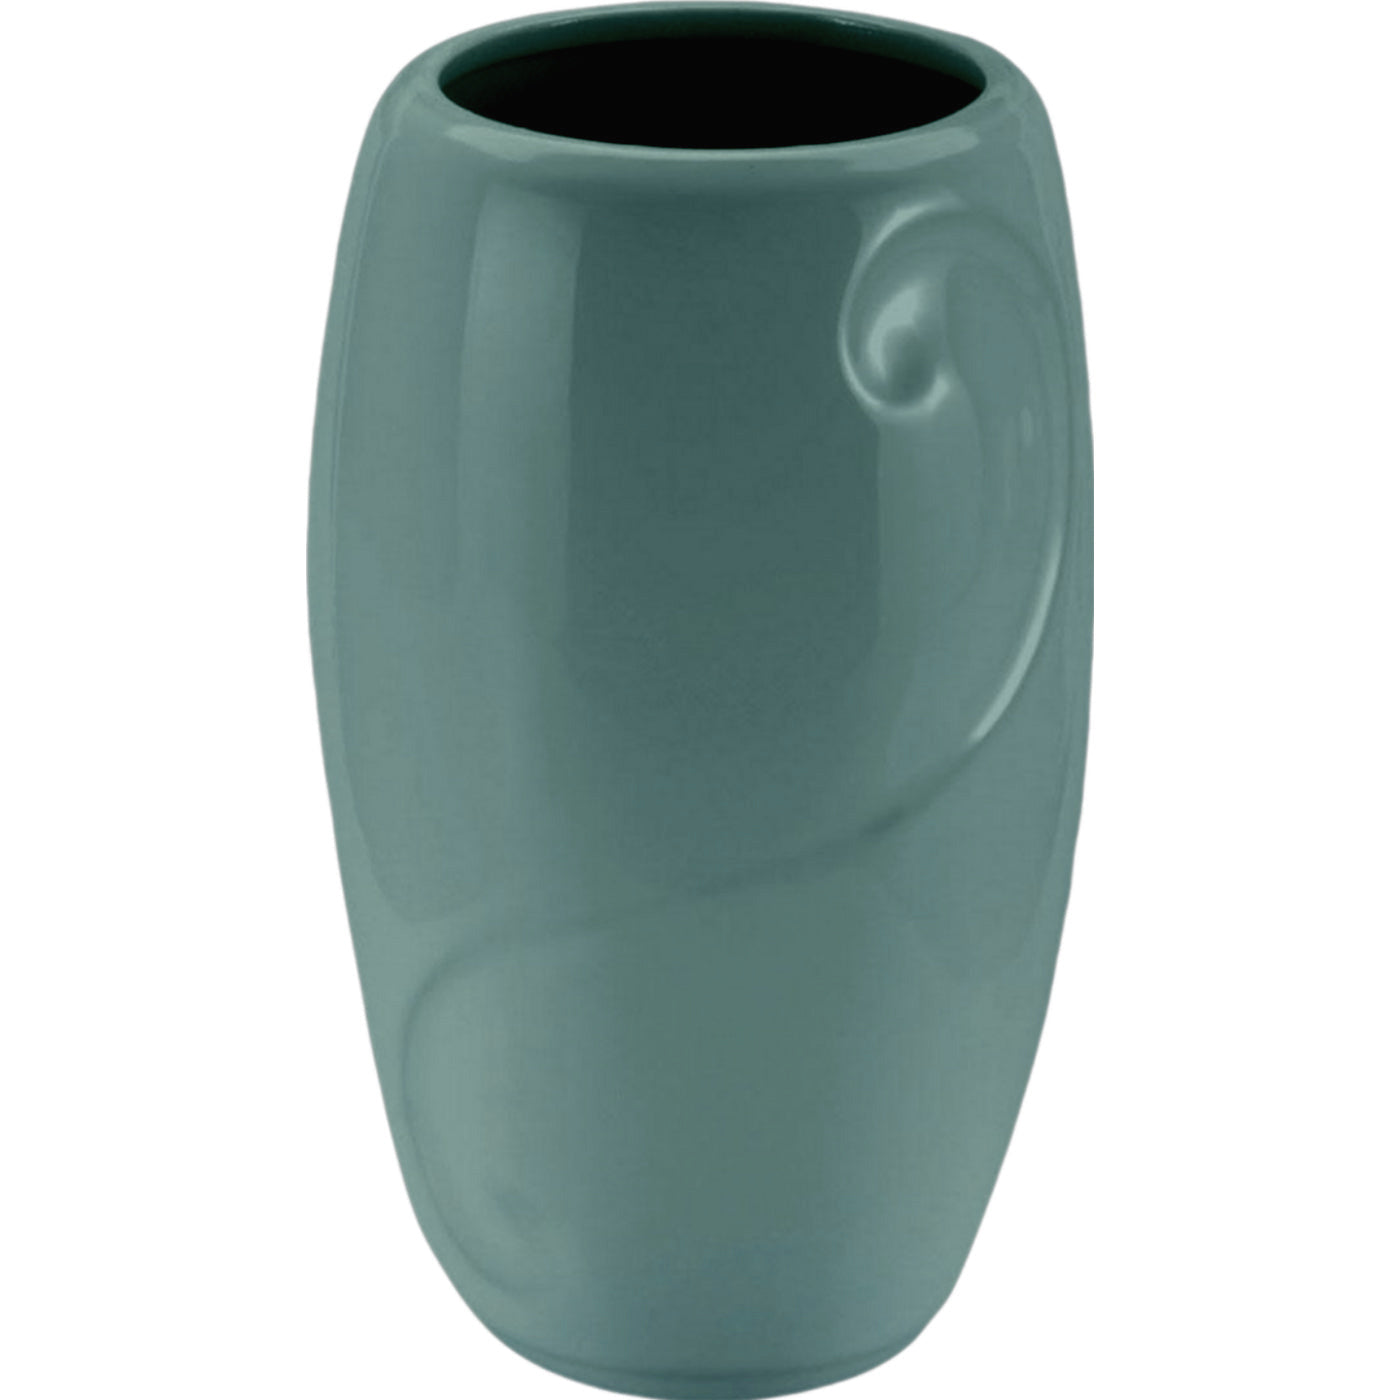 Grave vase Sharon green 21x13cm - 8.3x5.1in In green porcelain, wall attached SH124P/V